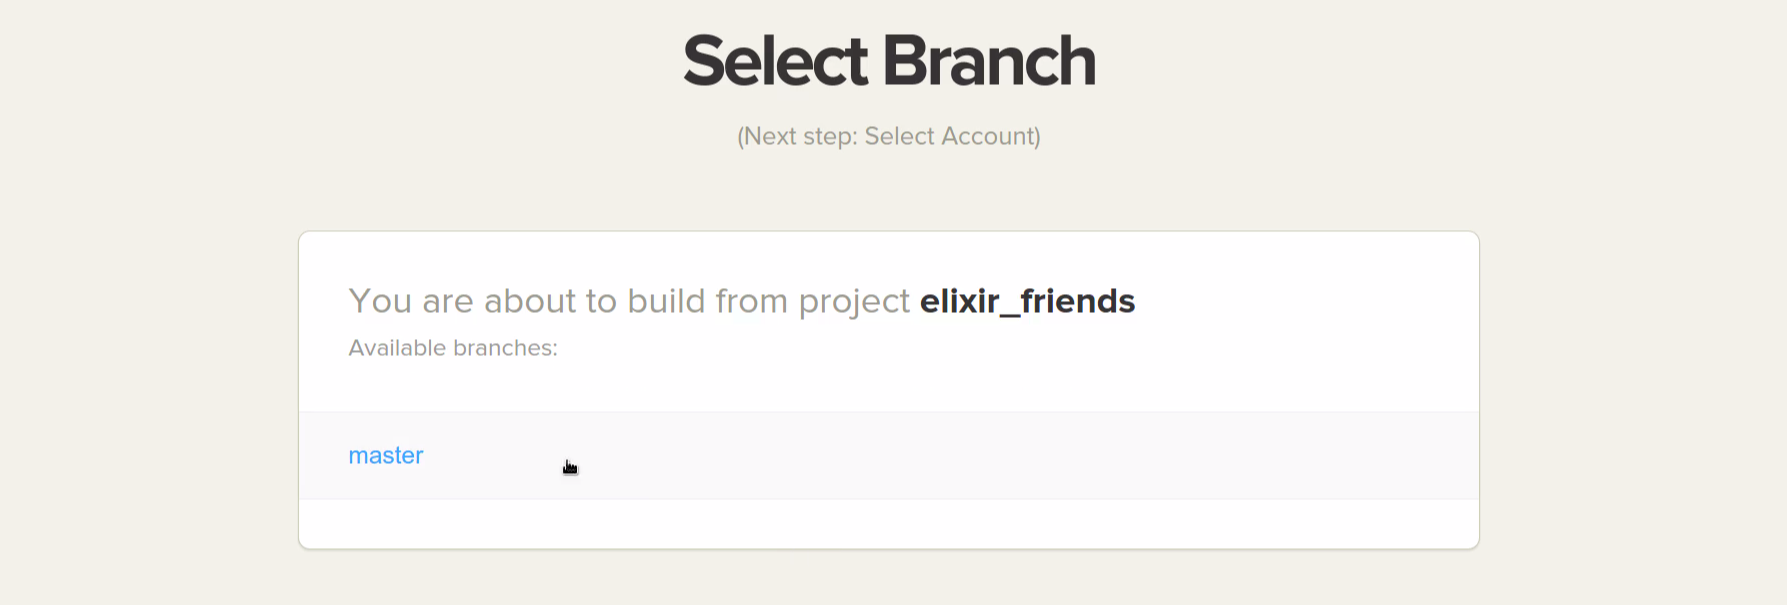 Select Branch